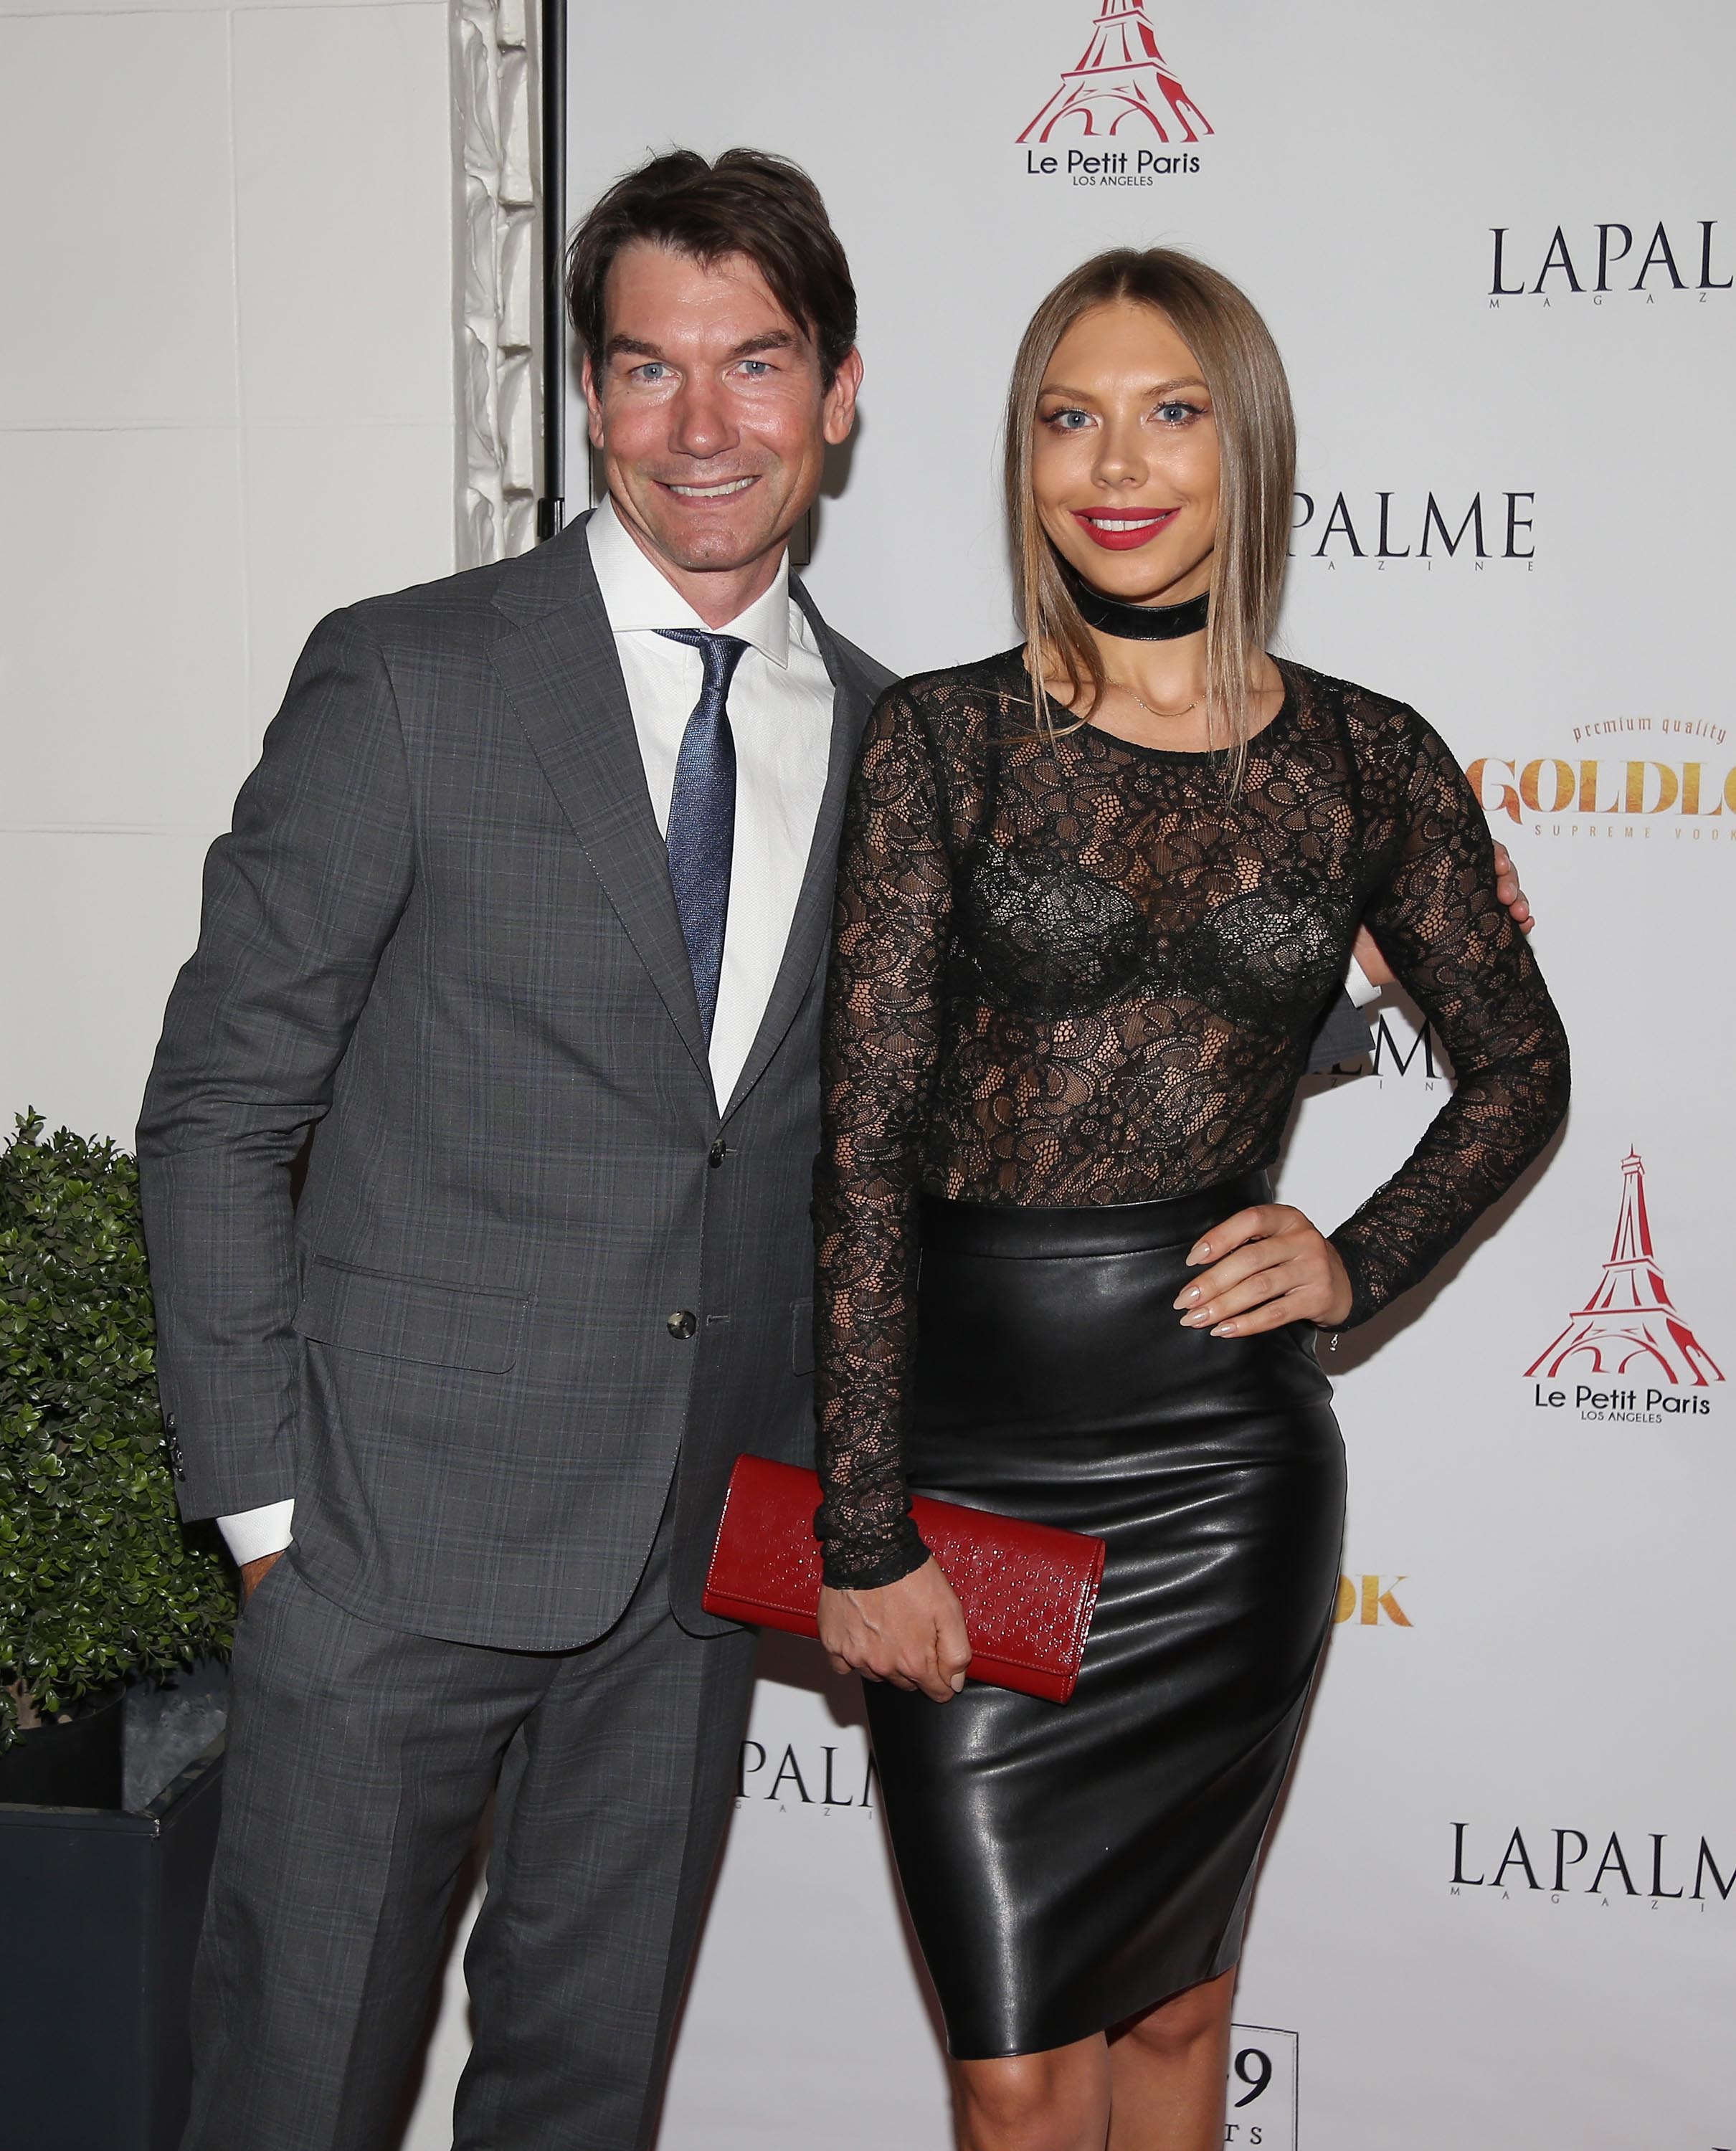 Julia Lanski attends the LaPalme Magazine Fall Issue Party